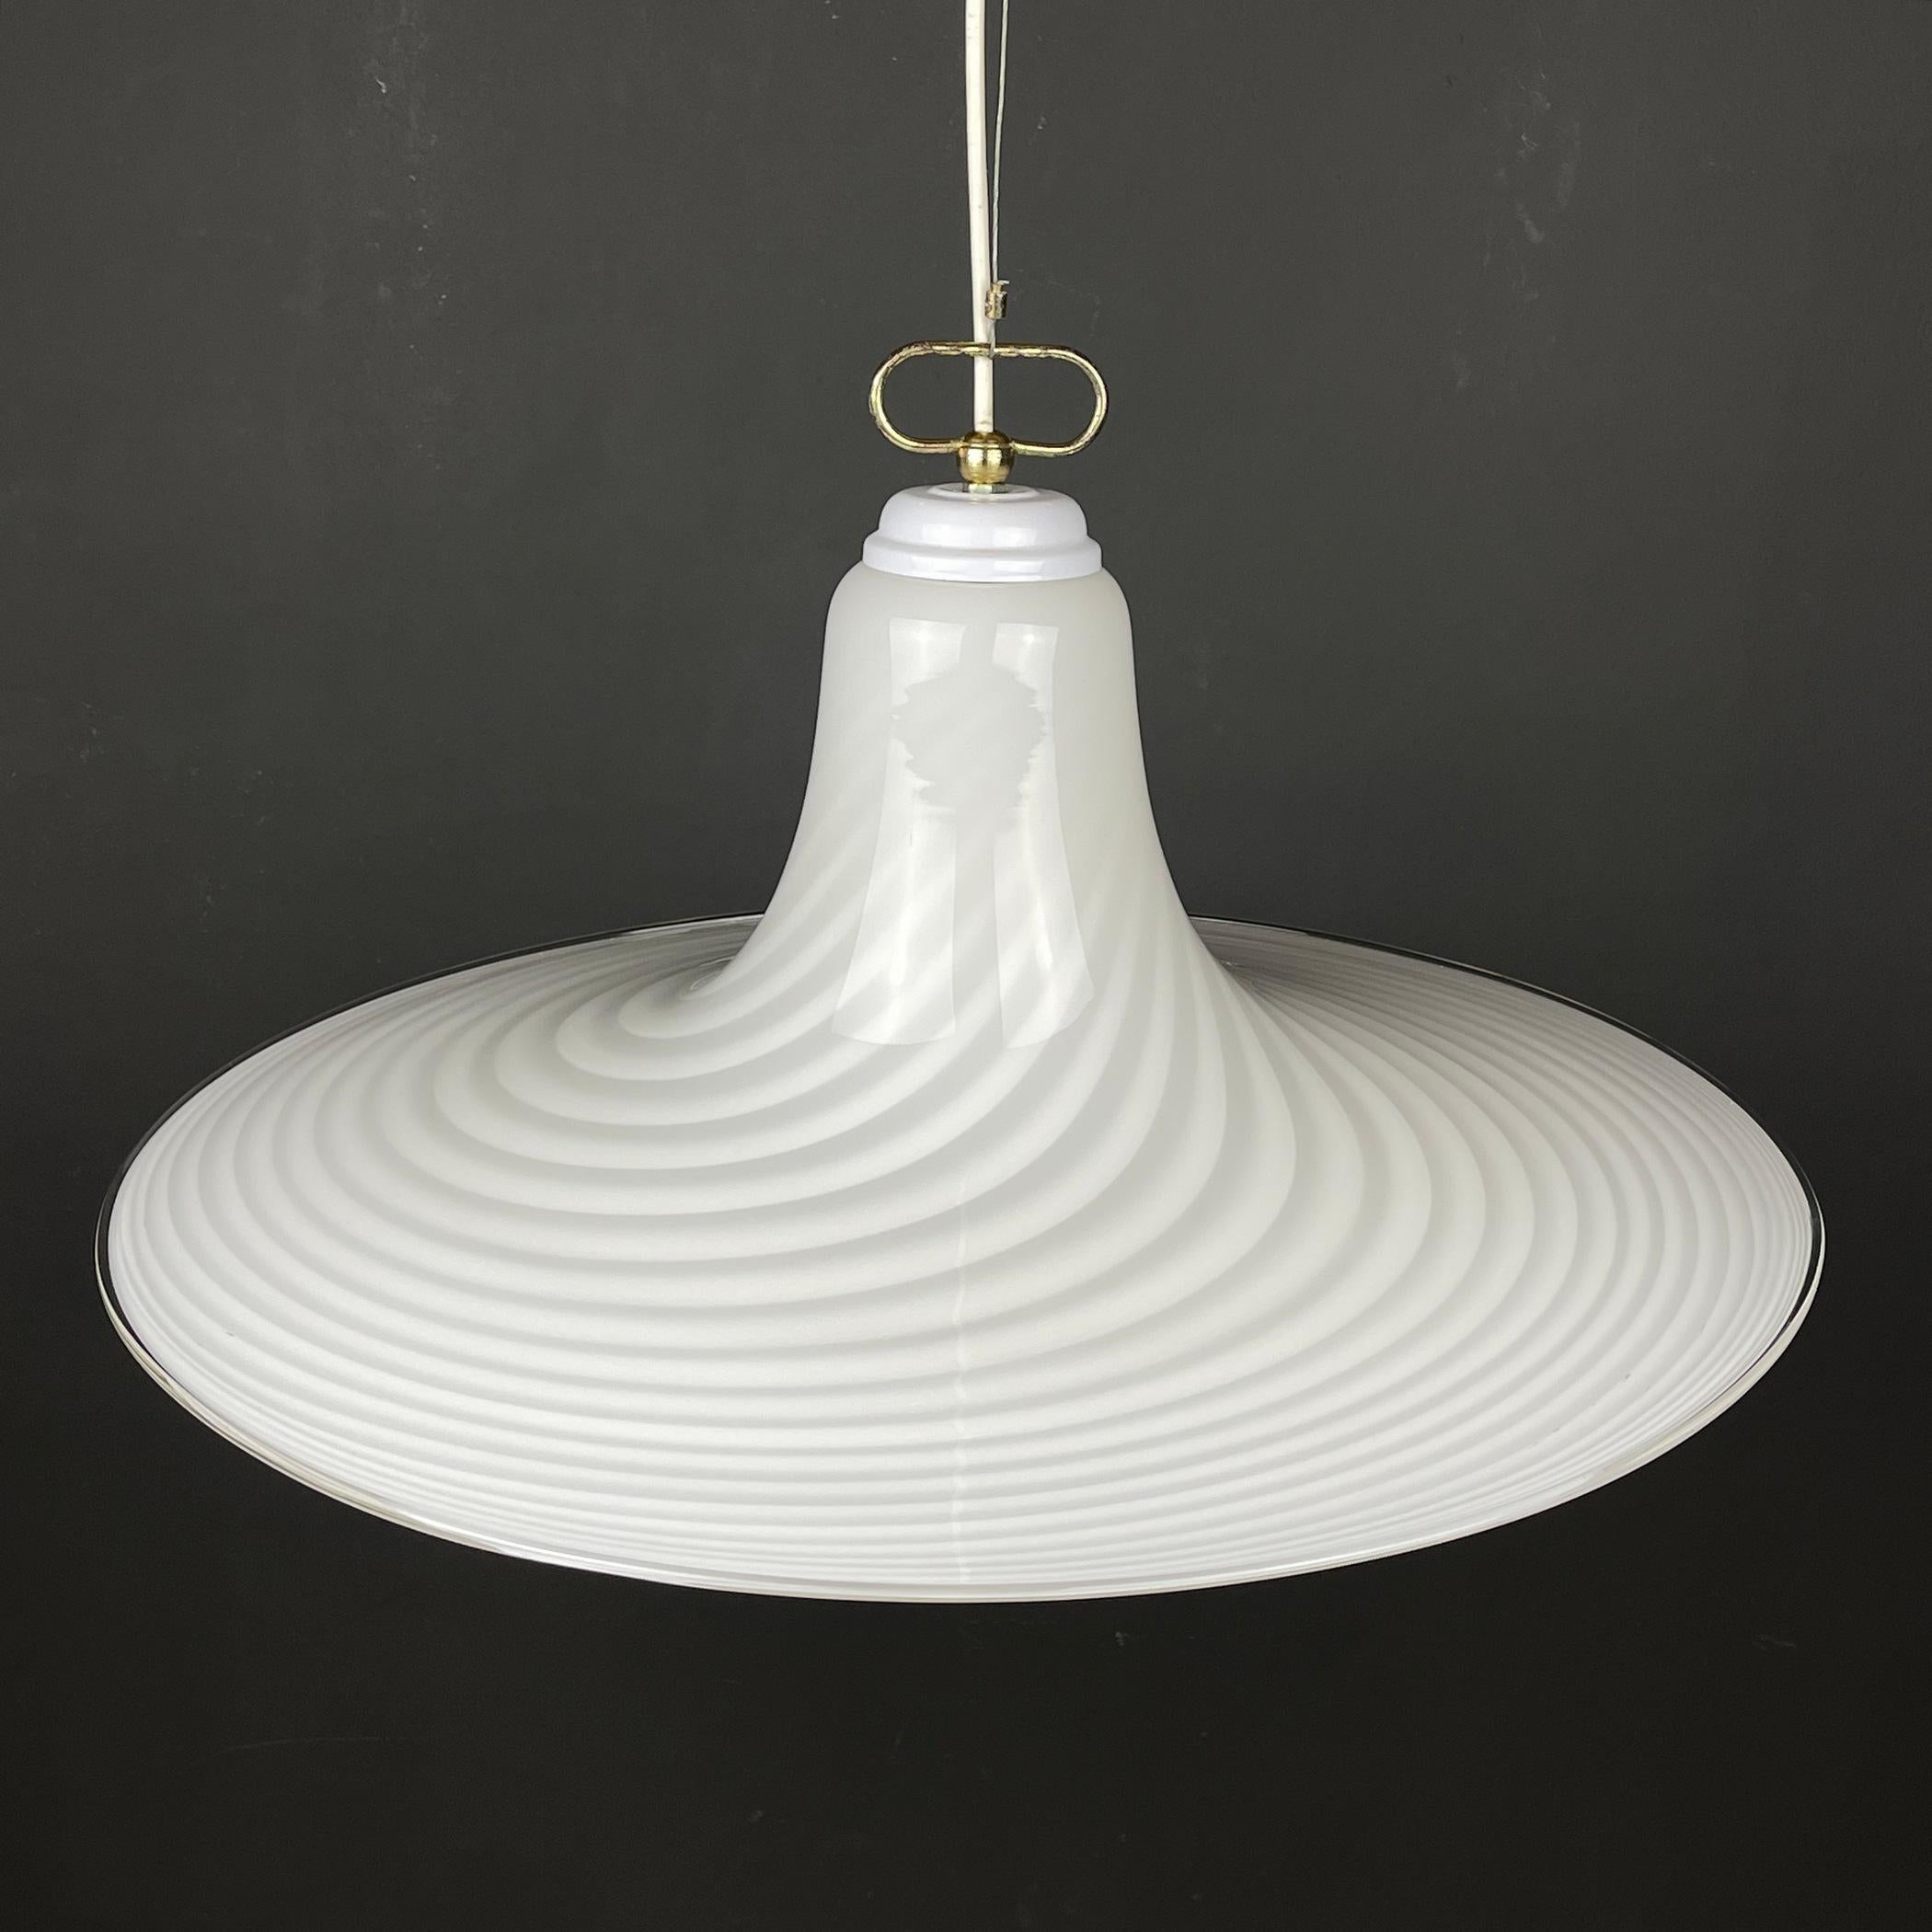 This swirl retro Murano pendant lamp was made in Italy in the 70s. Very beautiful white Murano glass with bends in the form of a tulip. Really good vintage condition. No chips or cracks. Requires a standard Edison E27 with a screw lamp. Chandelier